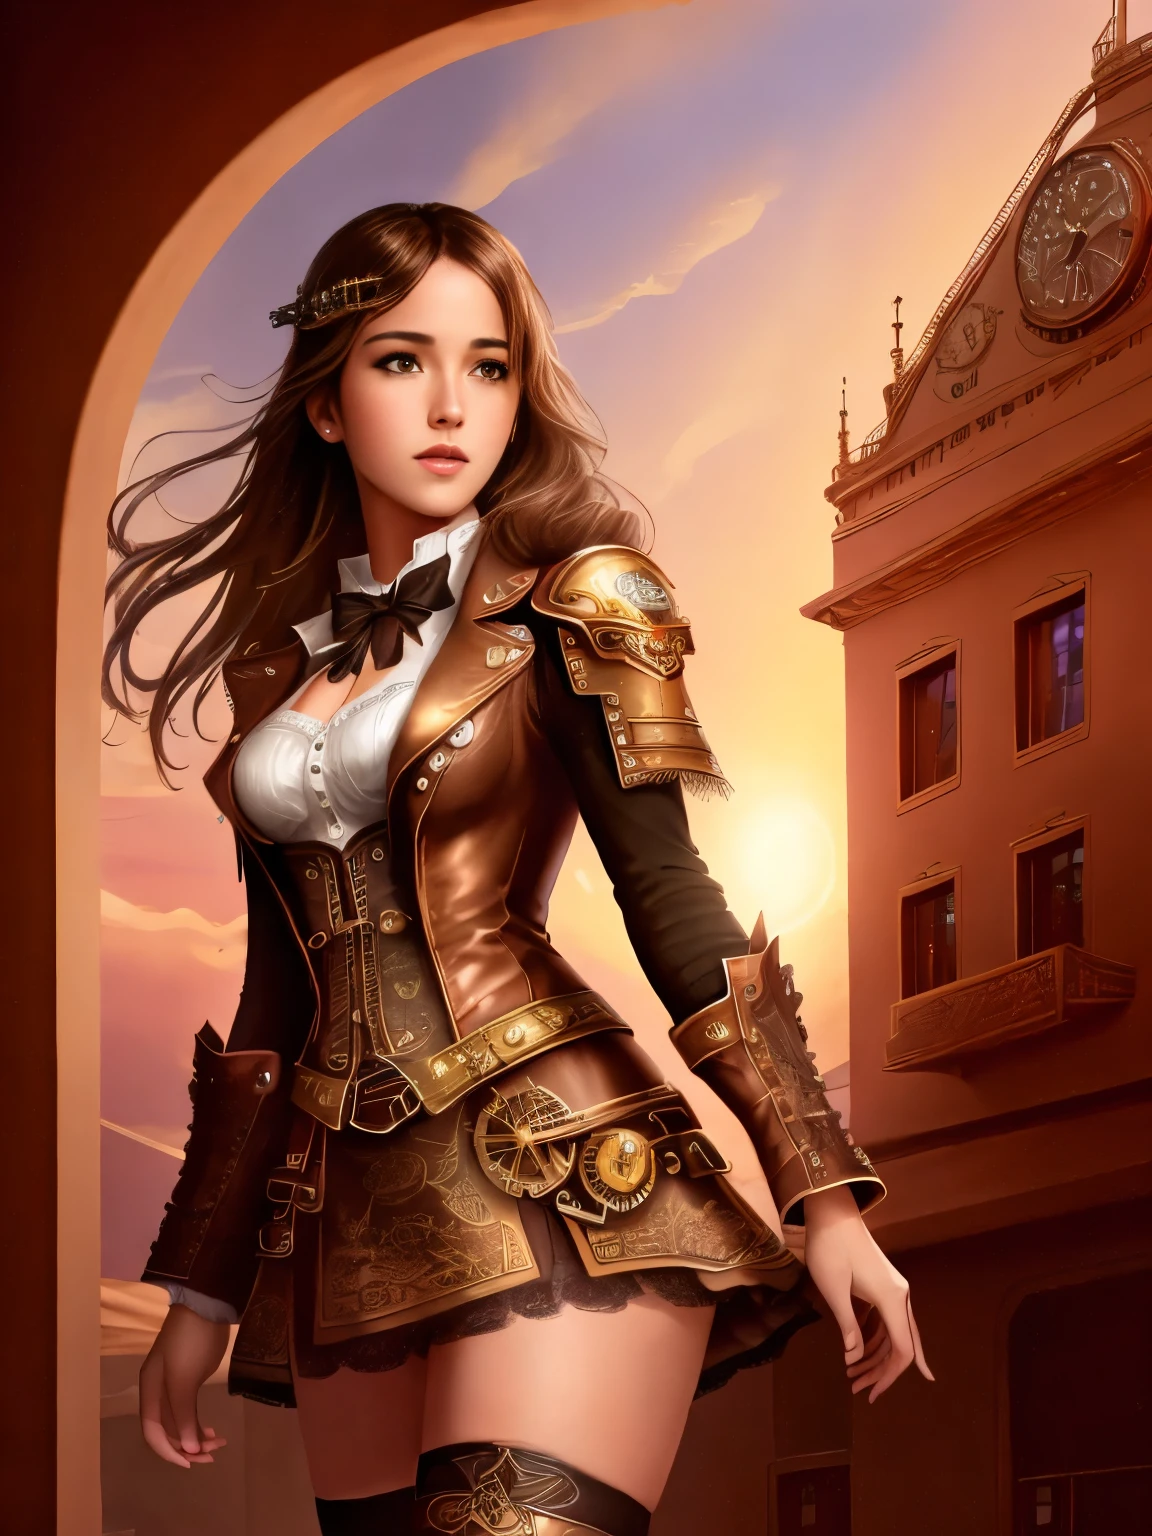 15 year old girl, steampunk, mini skirt, lace top, stockings, intricate gears, brass and copper accents, goggles, airship in background, cinematic lighting, dramatic pose, highly detailed, photorealistic, 8k, masterpiece